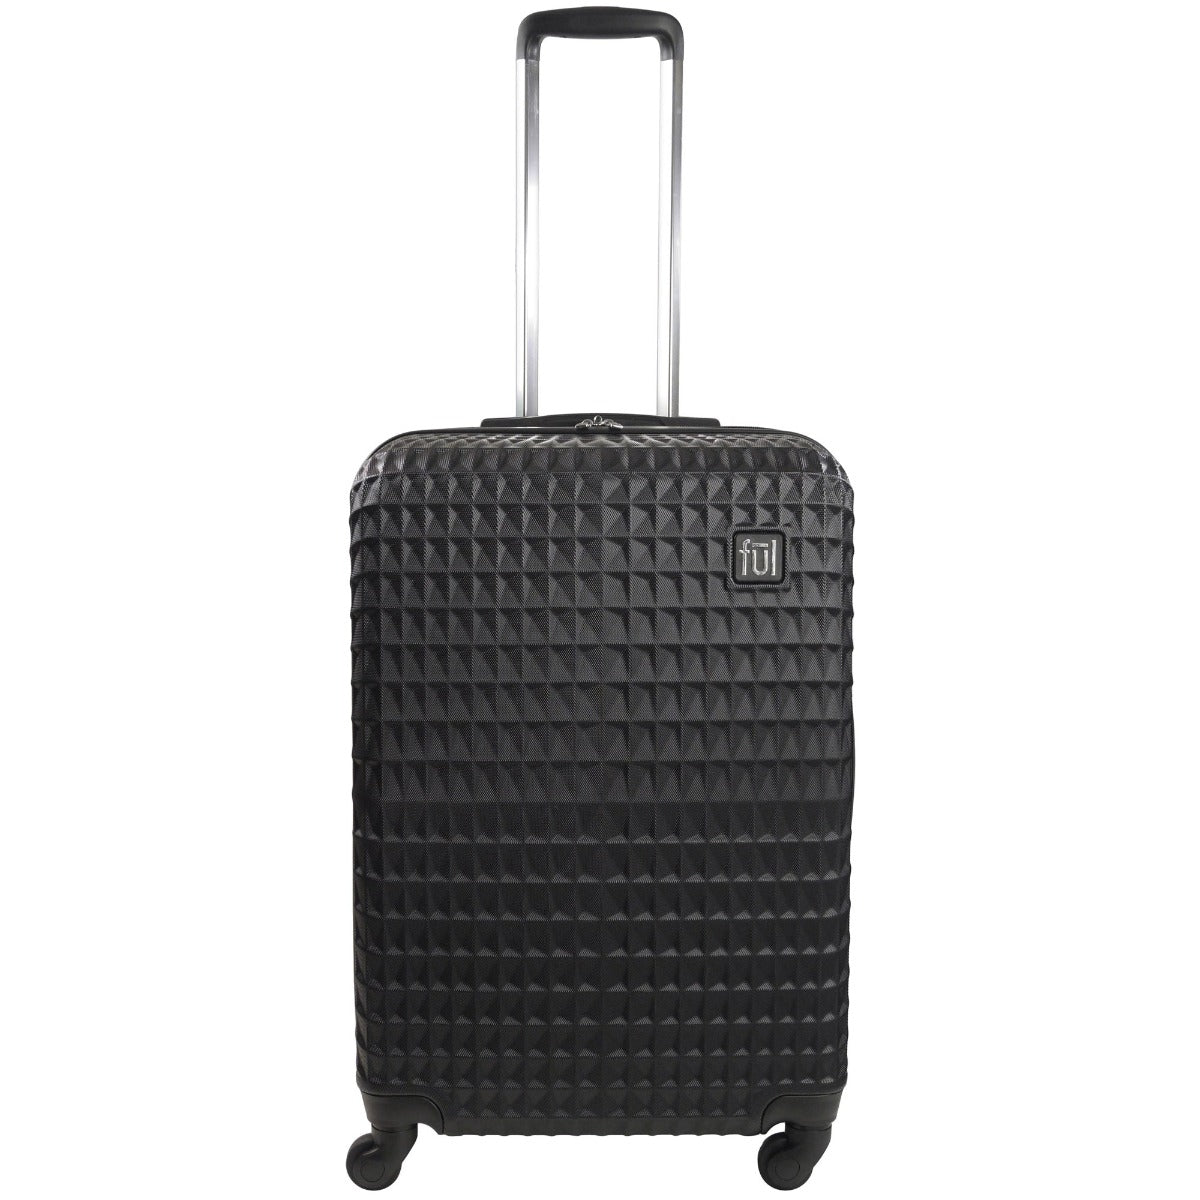 Ful Geo 26 inch checked luggage bag hard sided spinner suitcase black